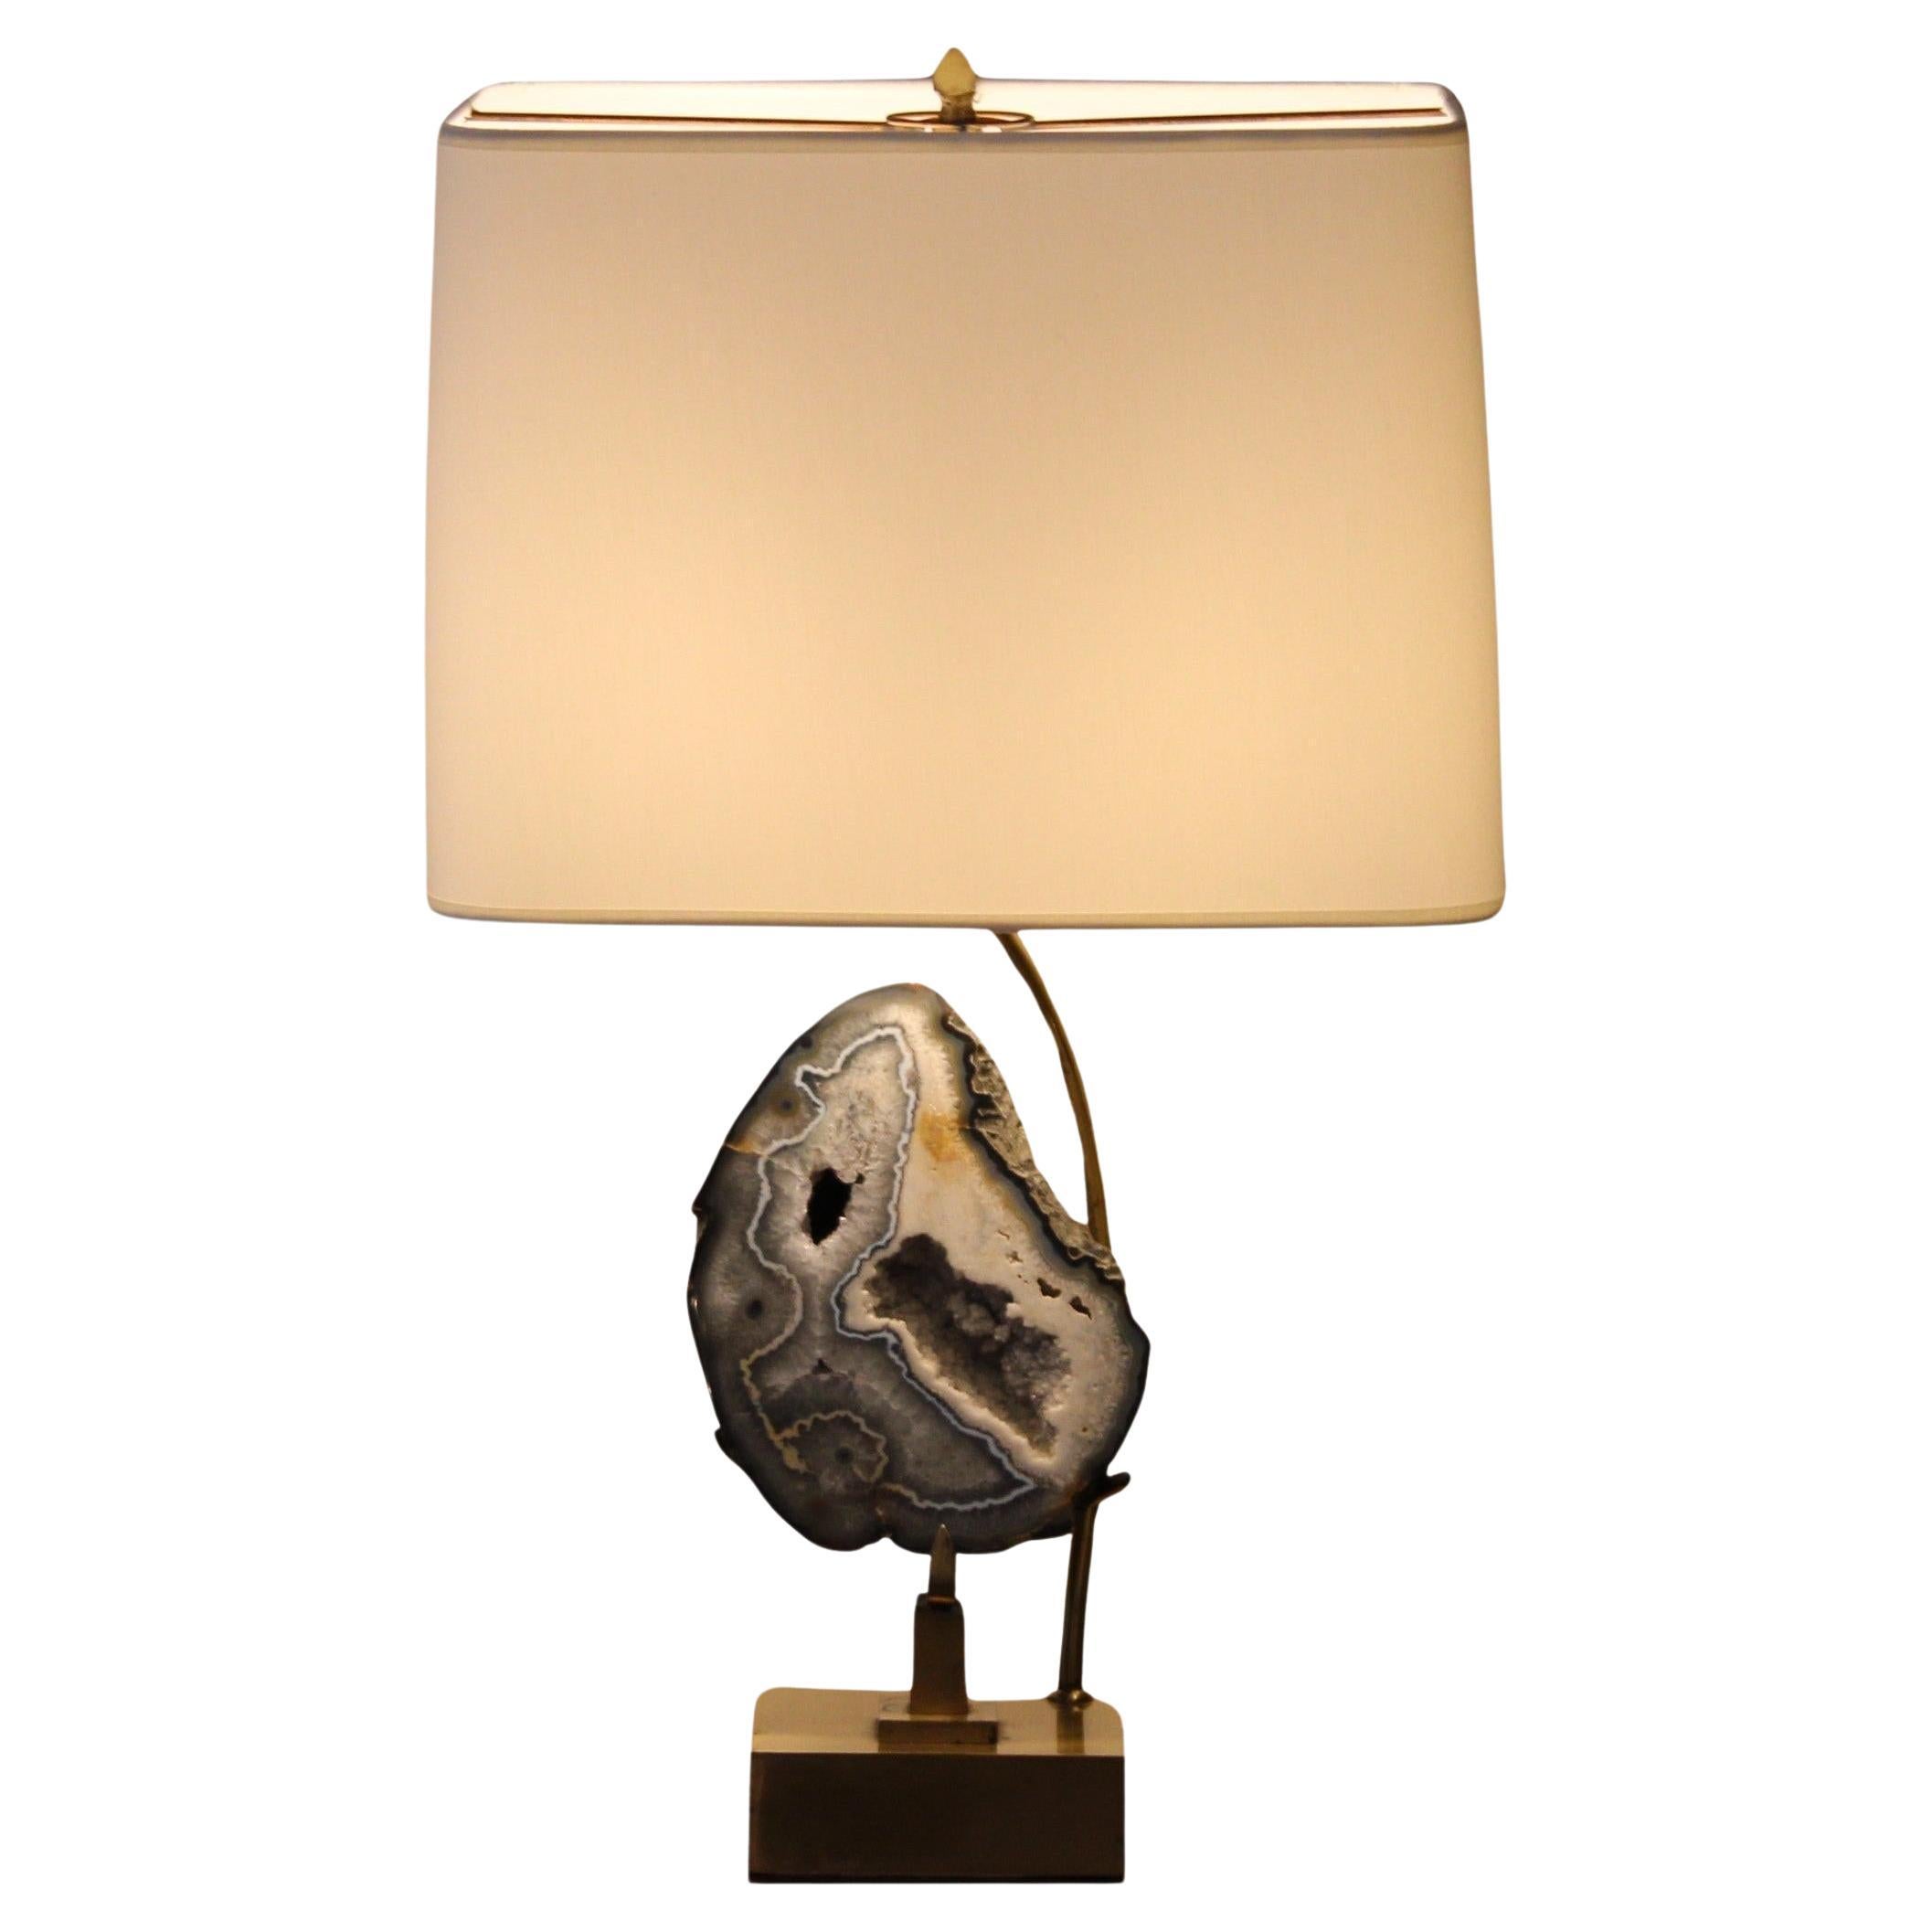 Table lamp in the style of Willy Daro, circa 1970